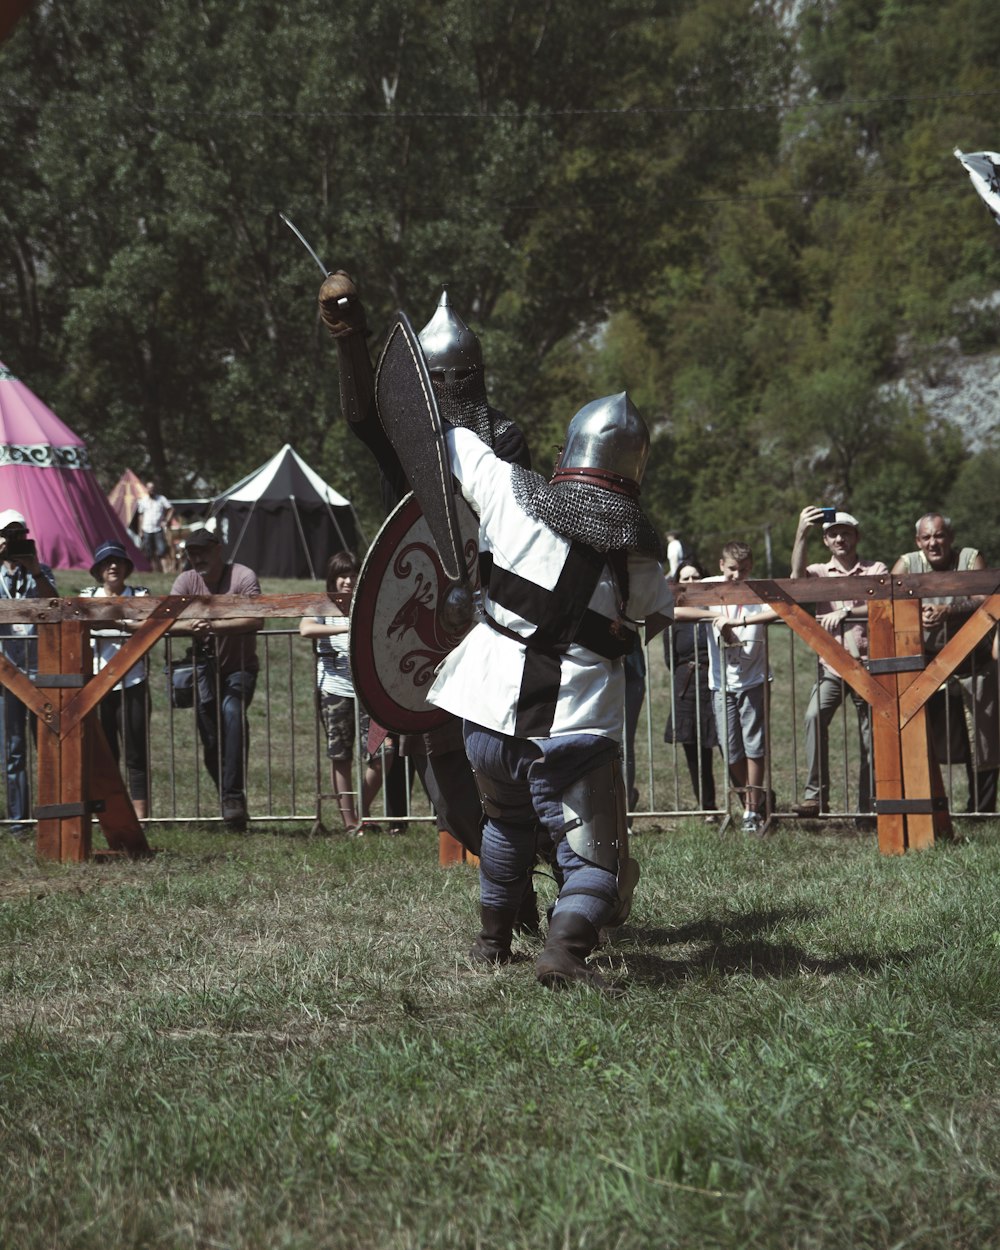 a person in a garment holding a sword in front of a crowd